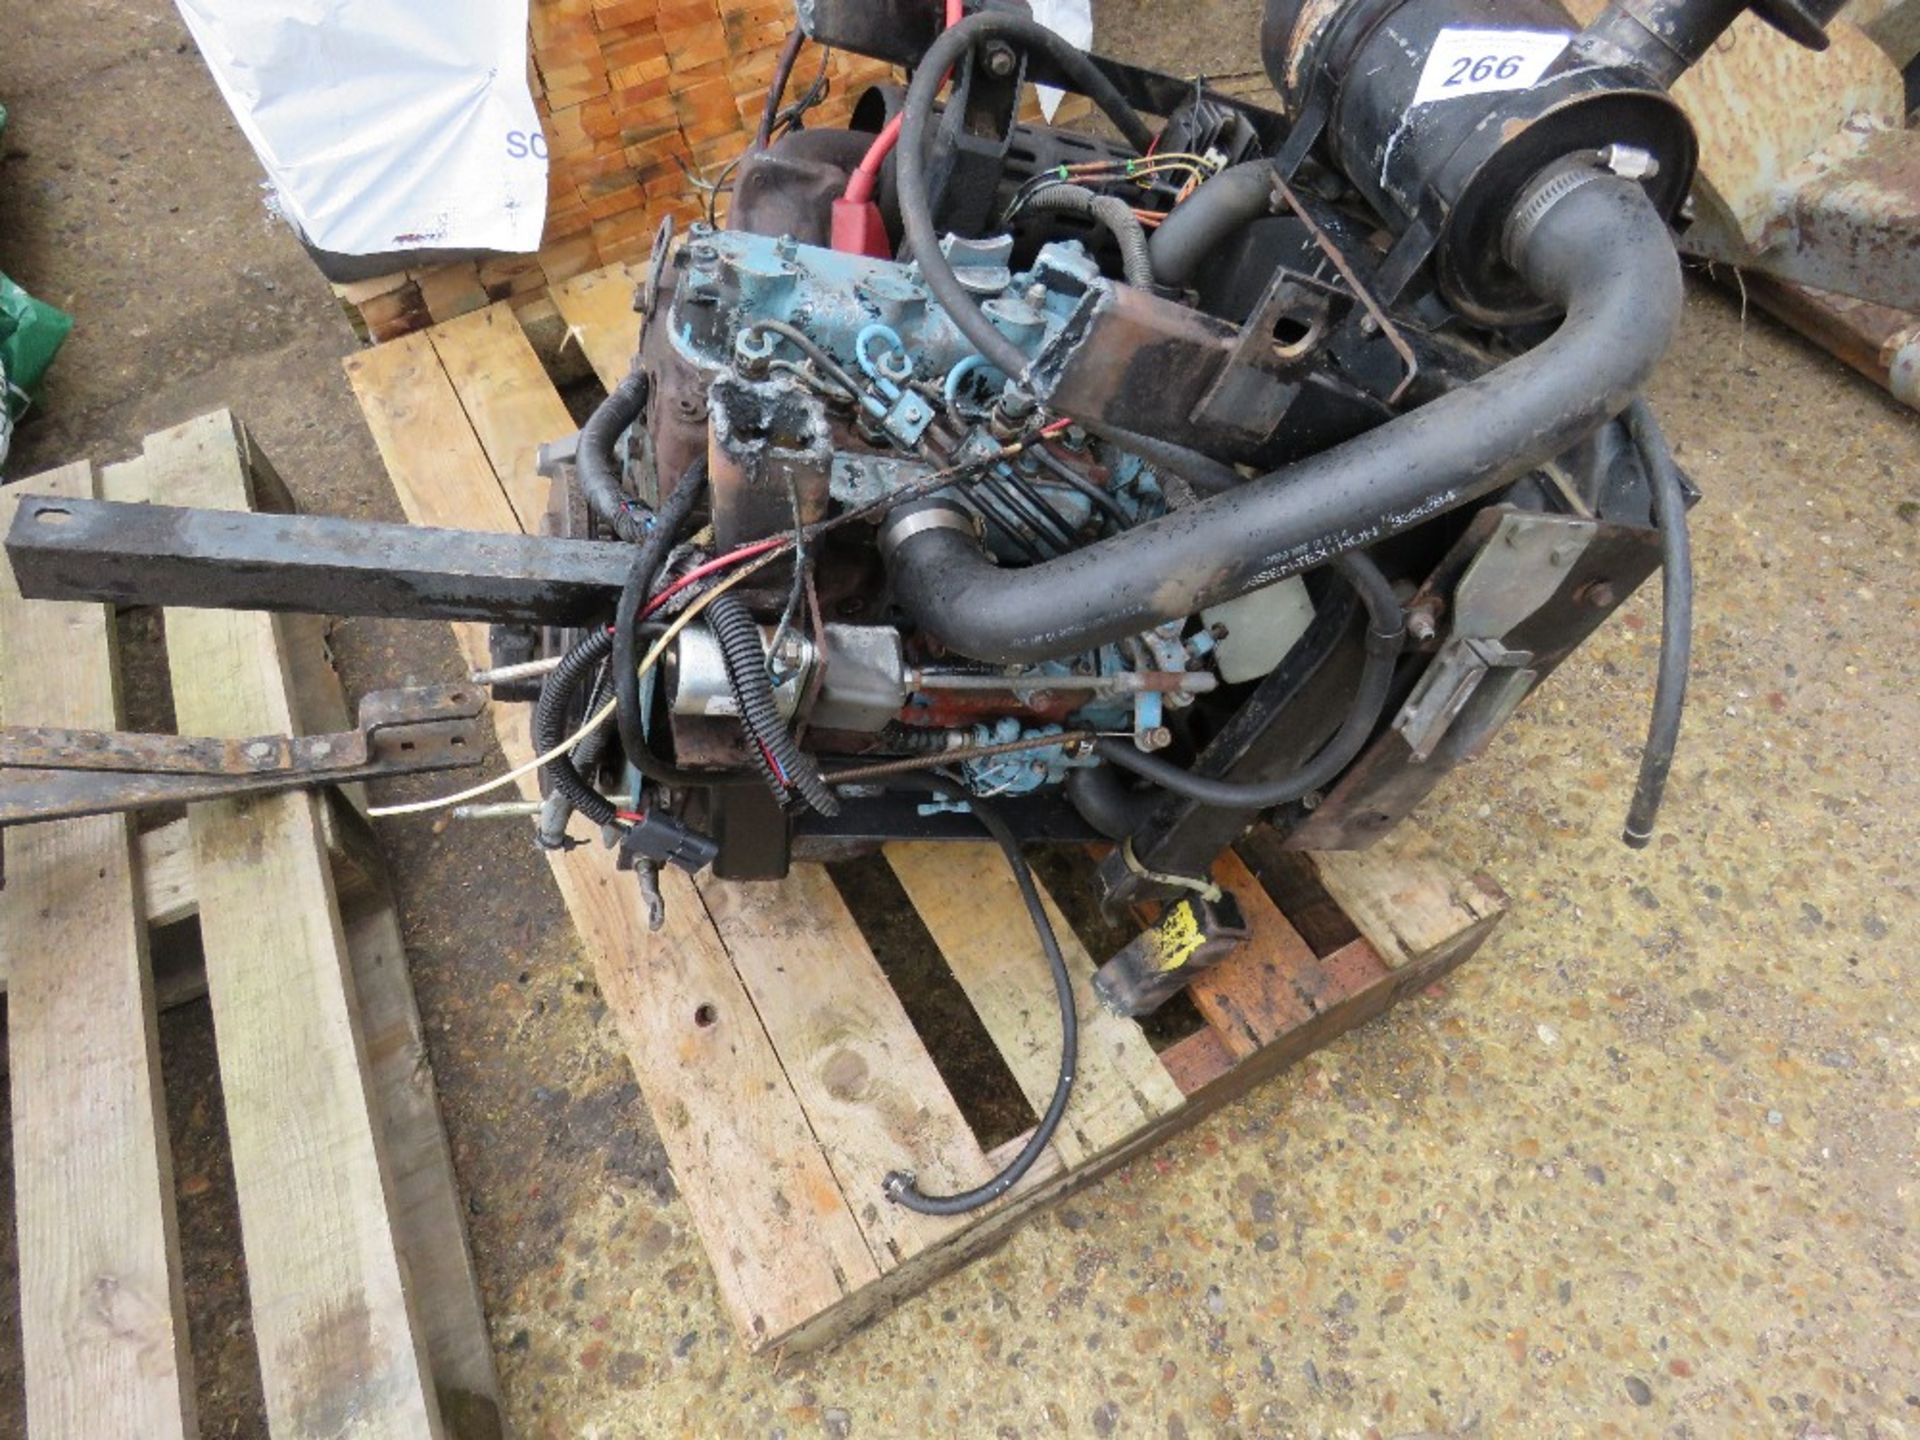 KUBOTA 3 CYLINDER DIESEL ENGINE FROM RANSOMES MOWER. RUNNING WHEN REMOVED.